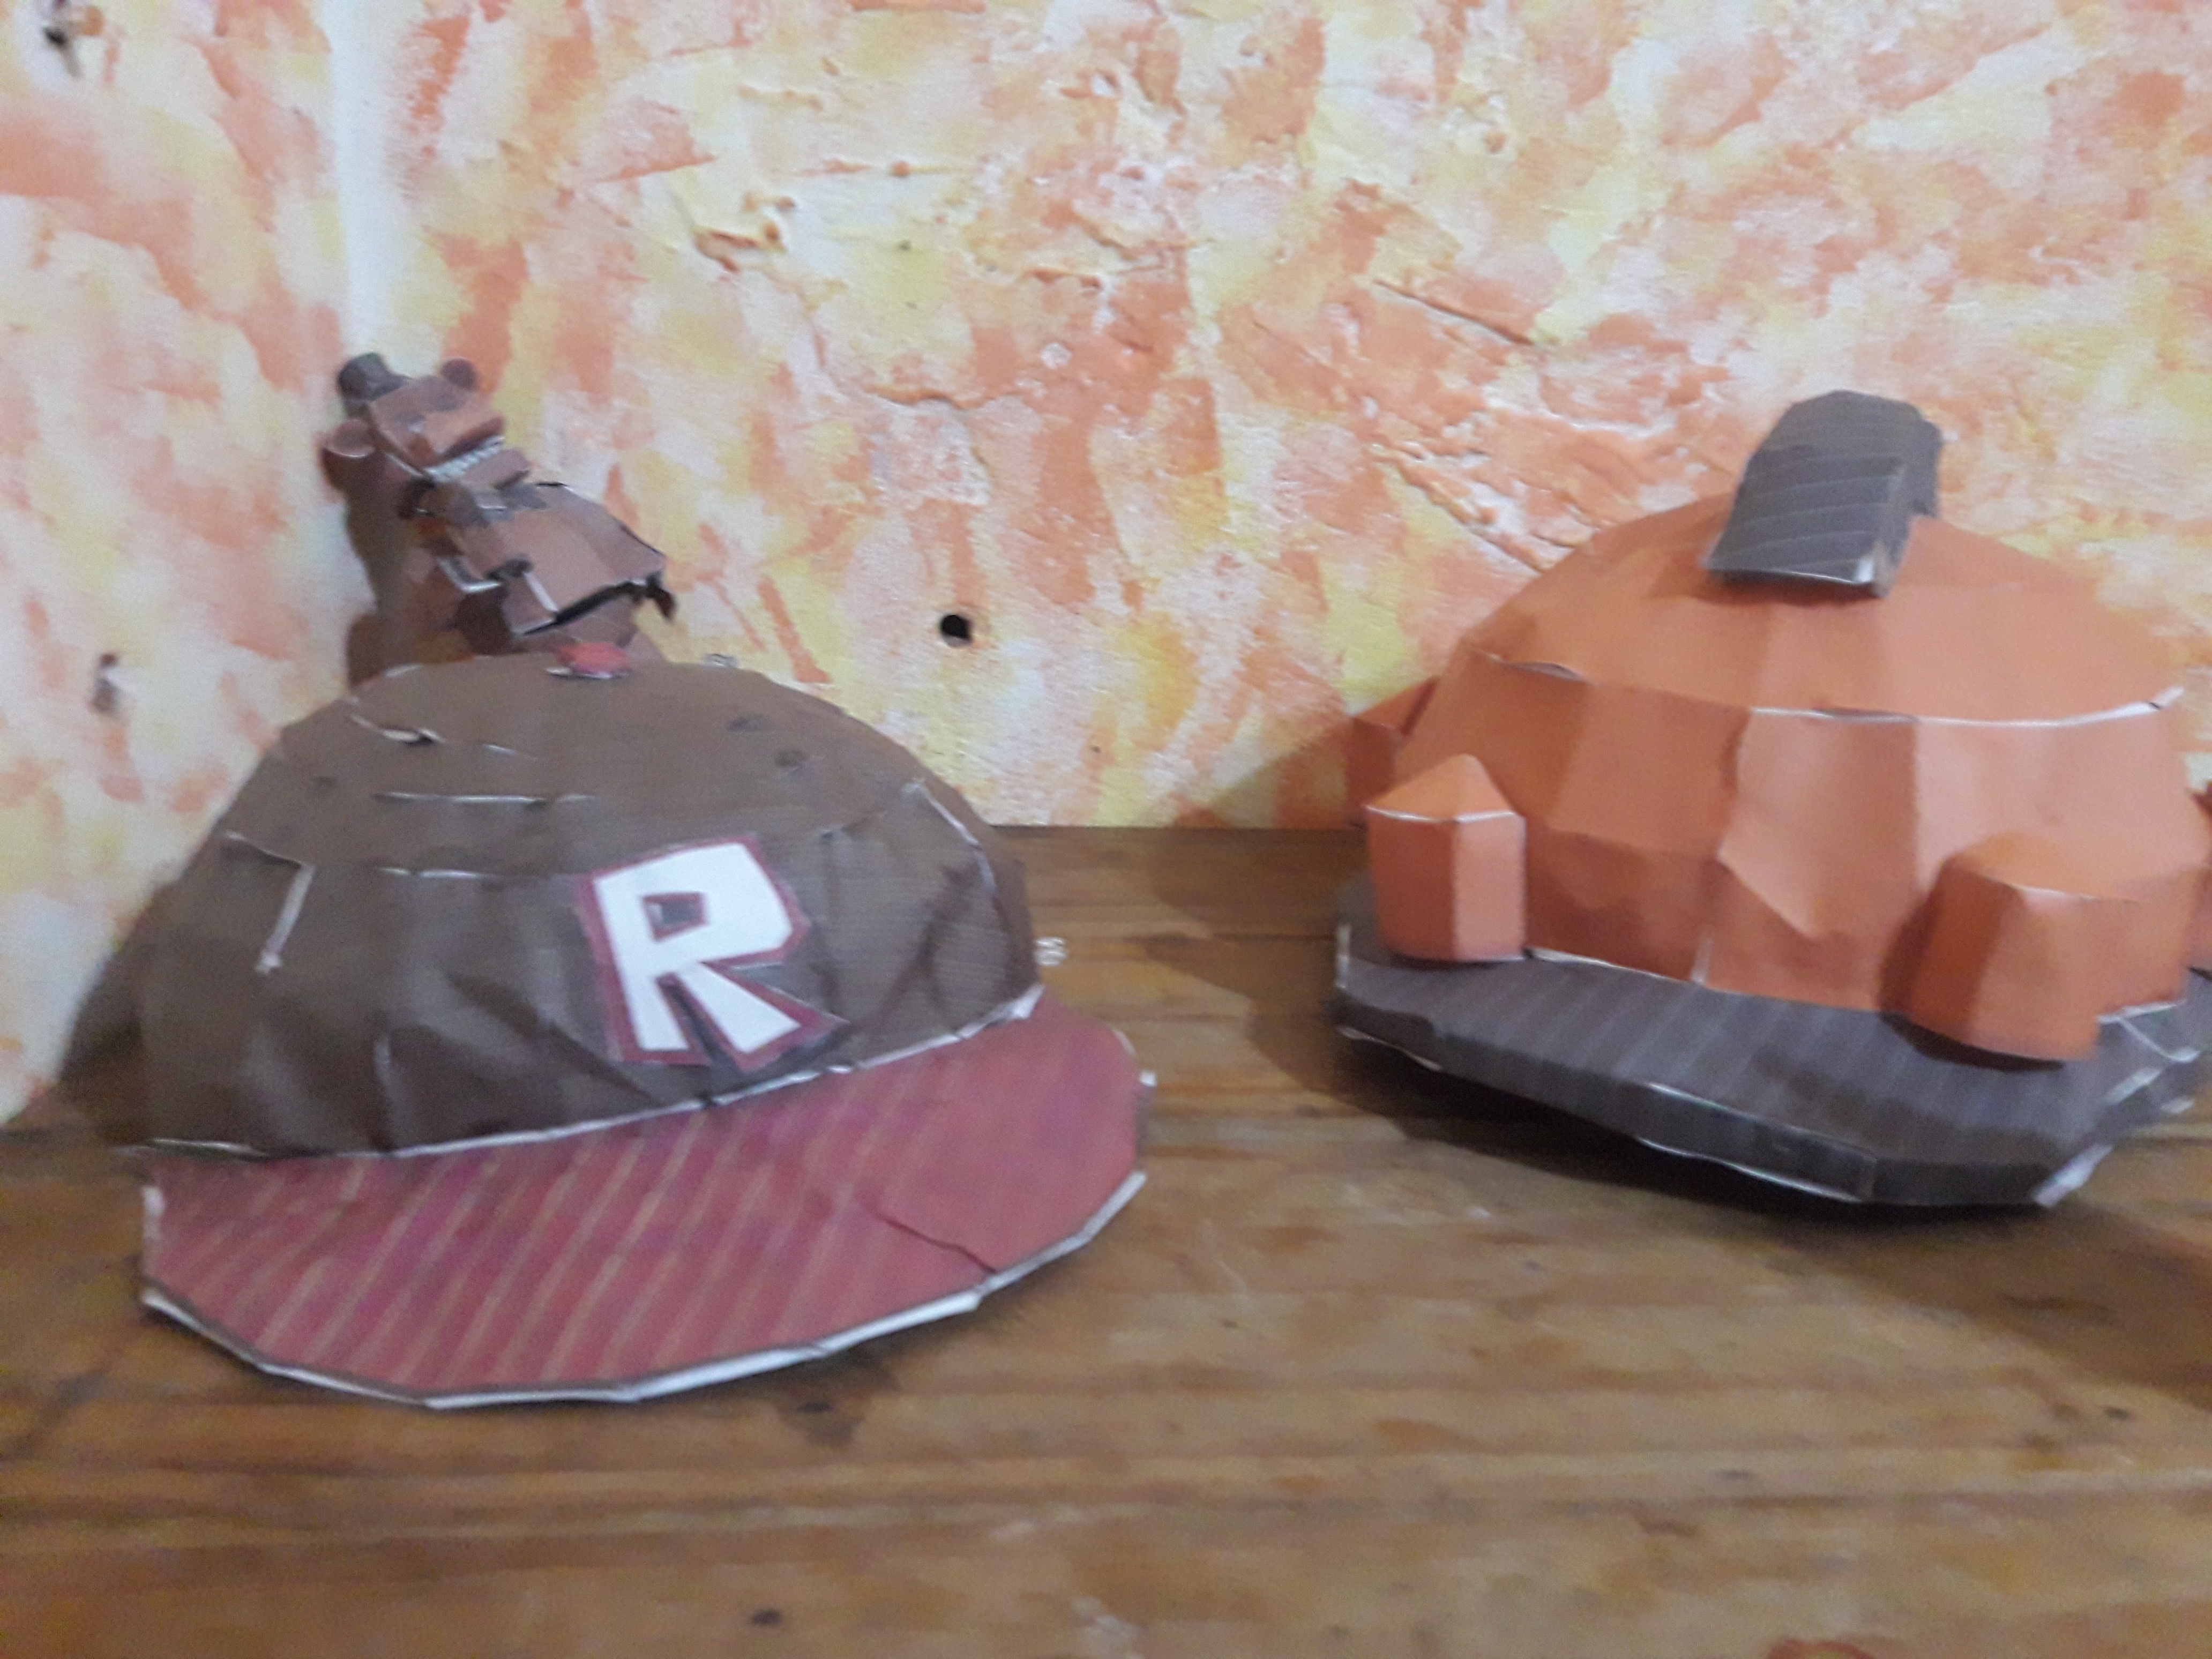 Tbc Hat And Roblox R Cap By Panastraluwu On Deviantart - roblox papercraft